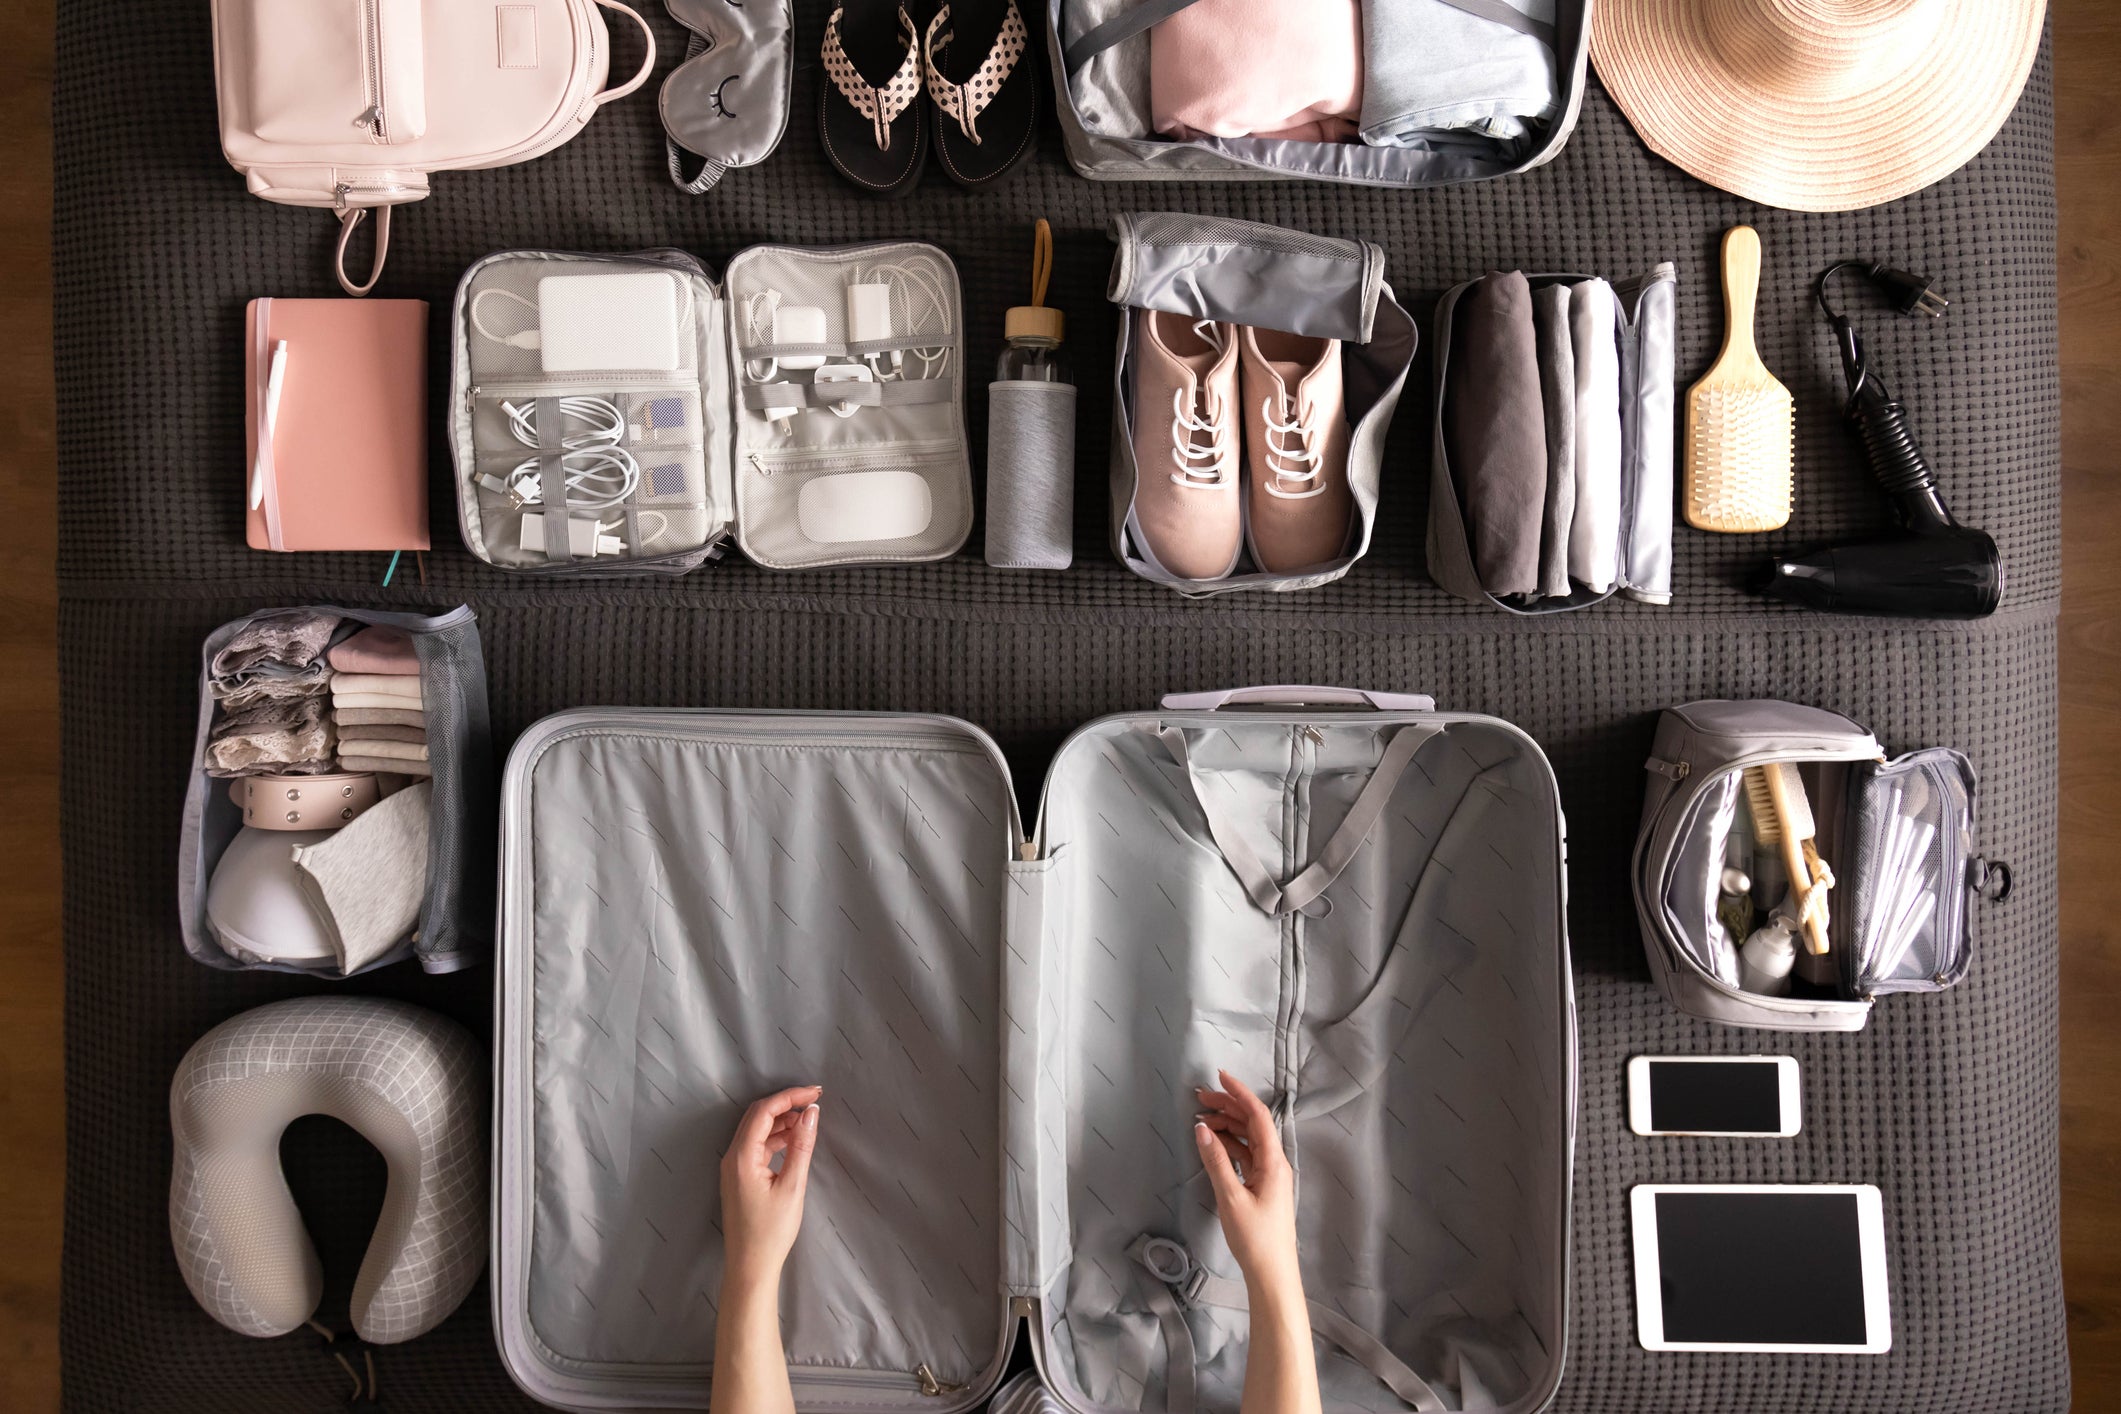 The Best Packing Cubes Are the Travel Must-Have That You Didn't